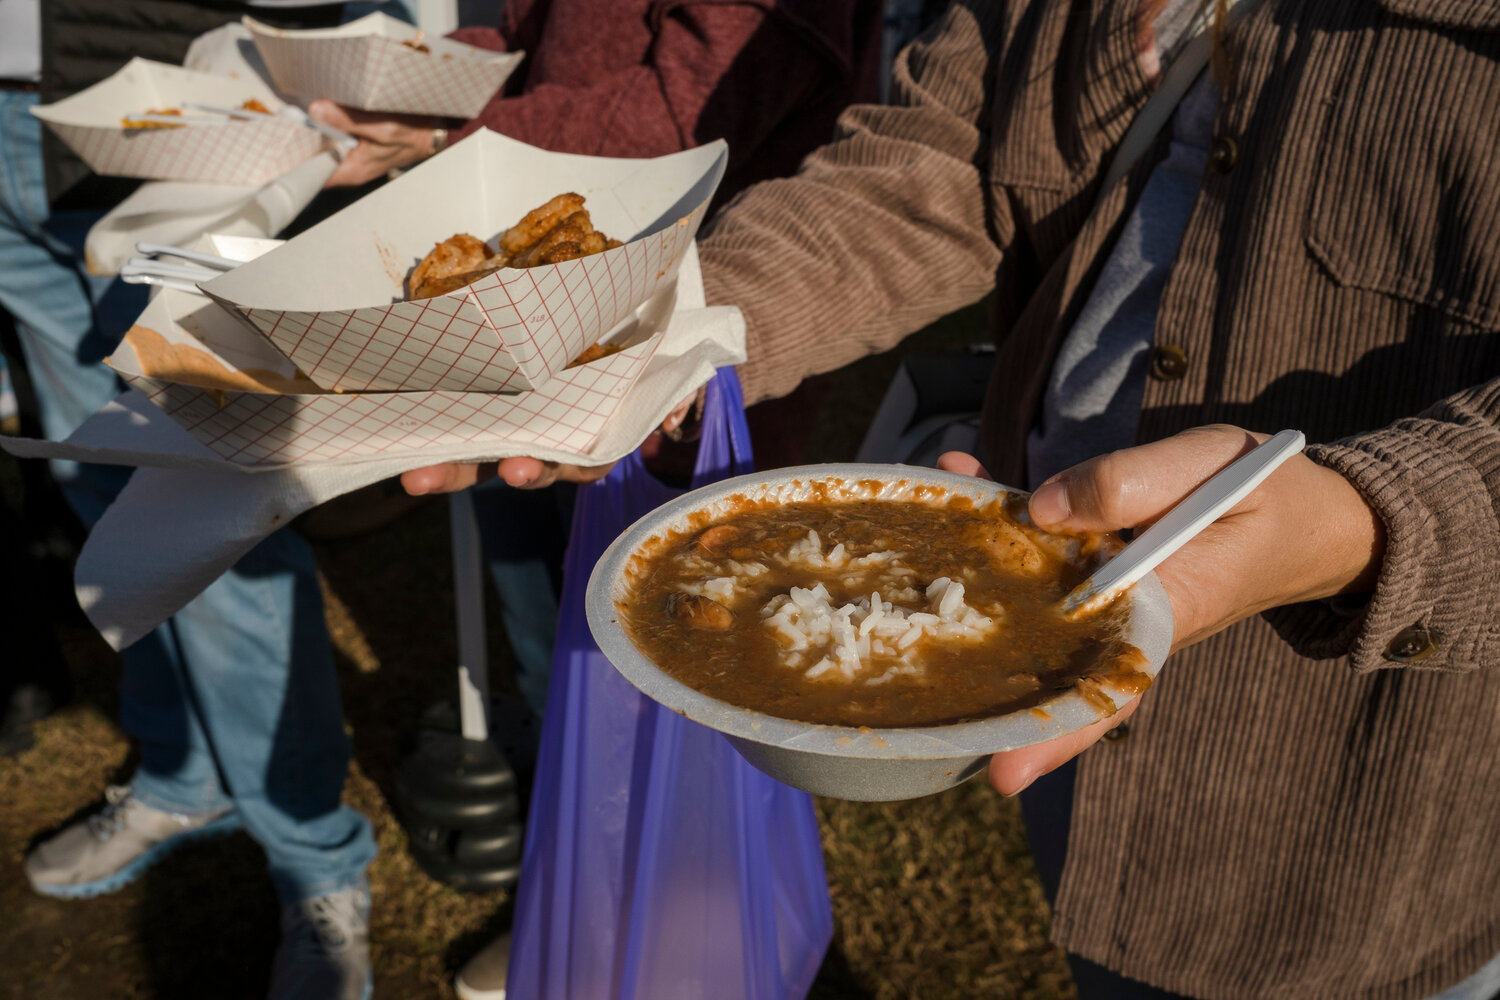 Smokin’ Kettle out of Daphne, Alabama was one of many gumbo choices at the 2023 Gumbo & Alabama Slammer Festival.